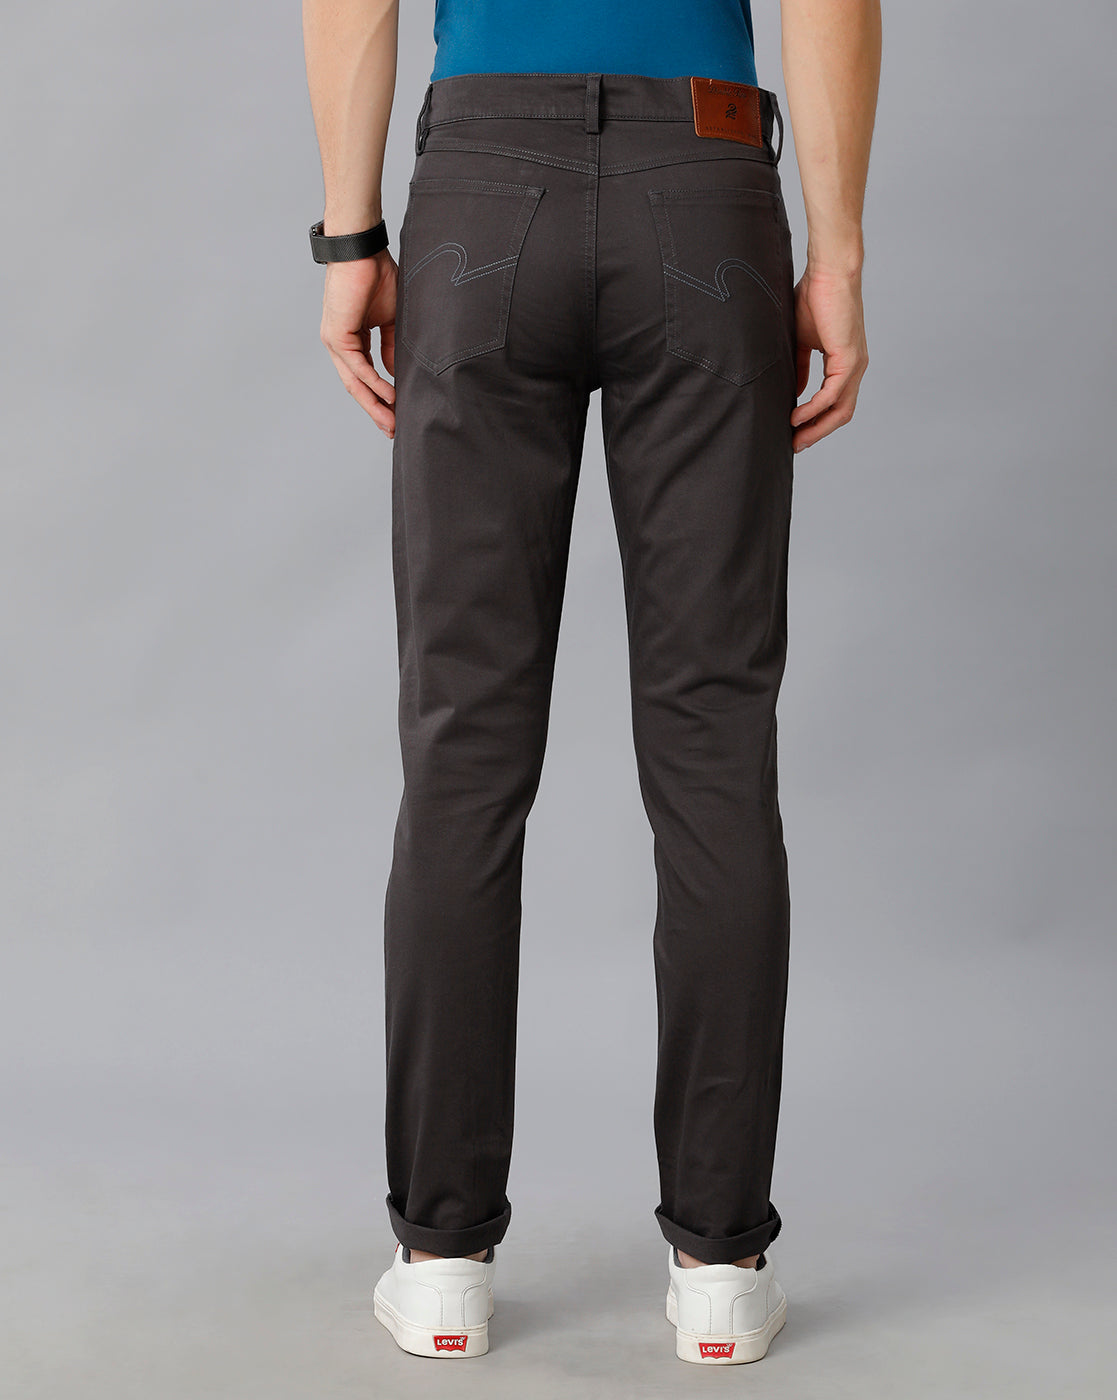 Grey Solid Casual Cotton Trouser